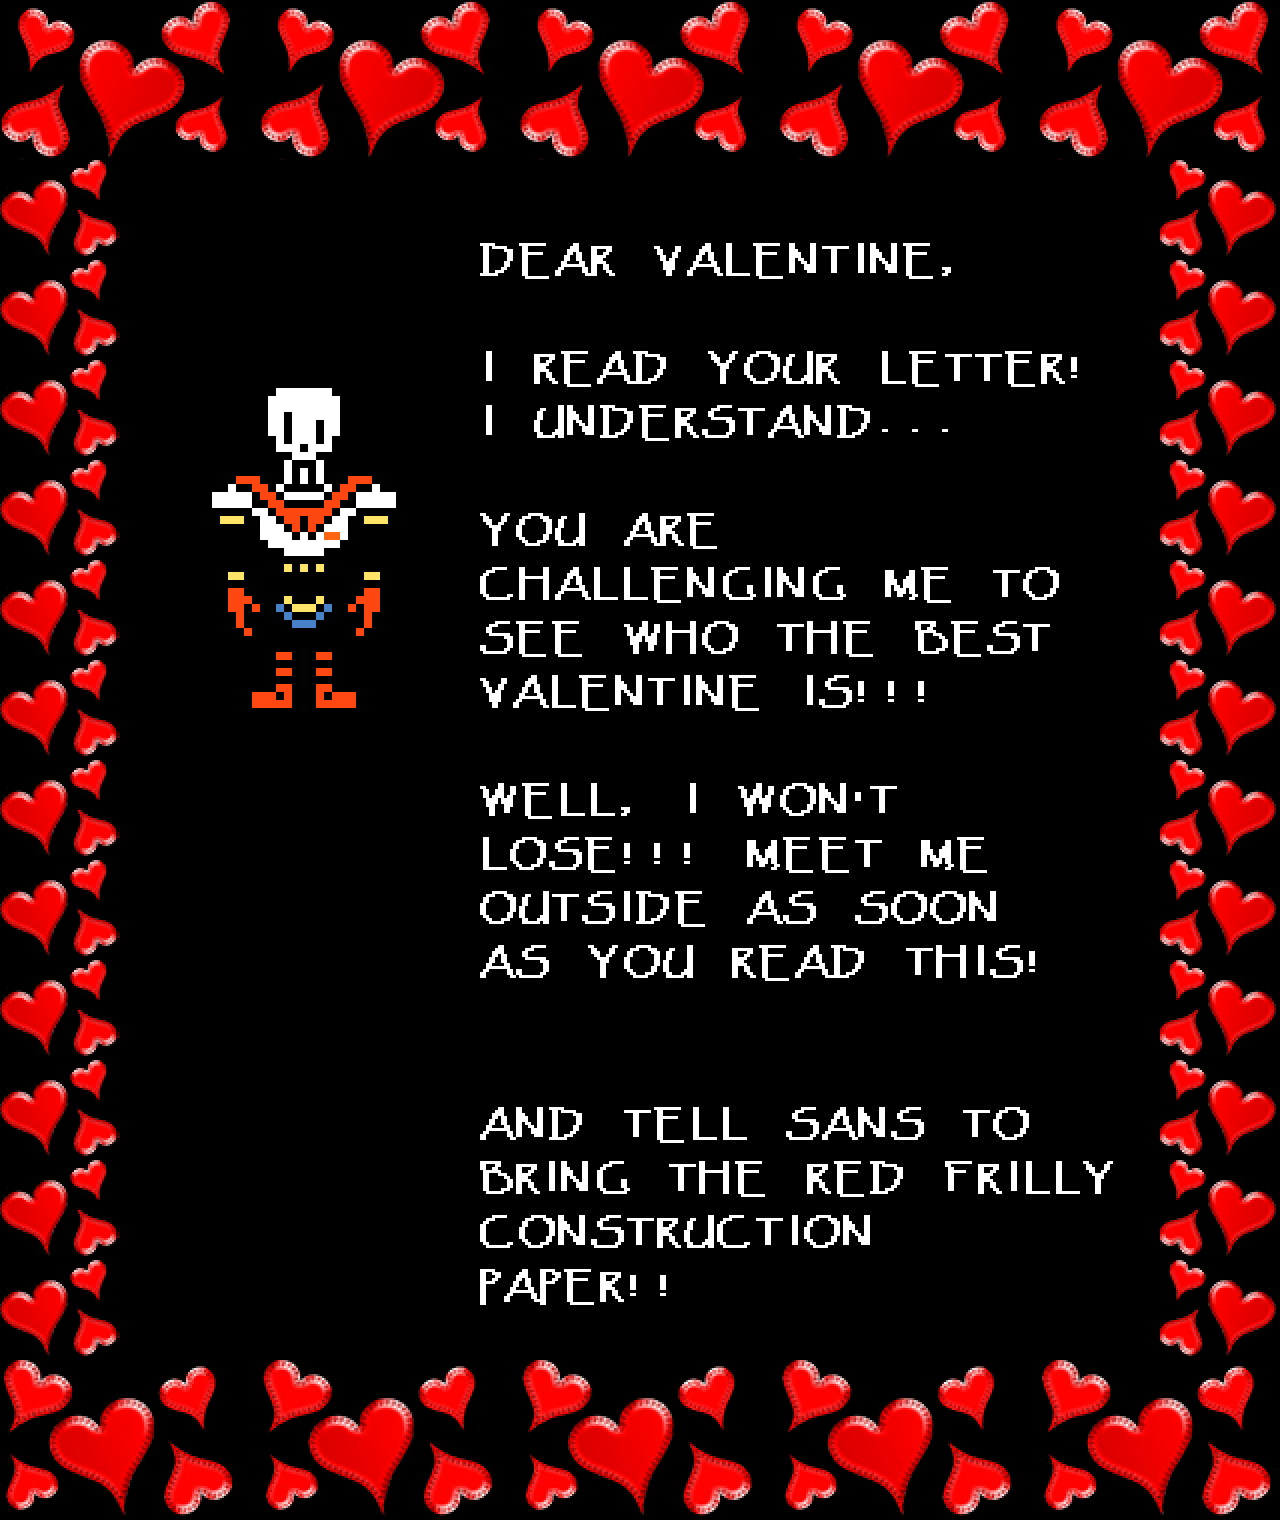 Papyrus: DEAR VALENTINE,

I READ YOUR LETTER! I UNDERSTAND…

YOU ARE CHALLENGING ME TO SEE WHO THE BEST VALENTINE IS!!!

WELL, I WON’T LOSE!!! MEET ME OUTSIDE AS SOON AS YOU READ THIS!

AND TELL SANS TO BRING THE RED FRILLY CONSTRUCTION PAPER!!